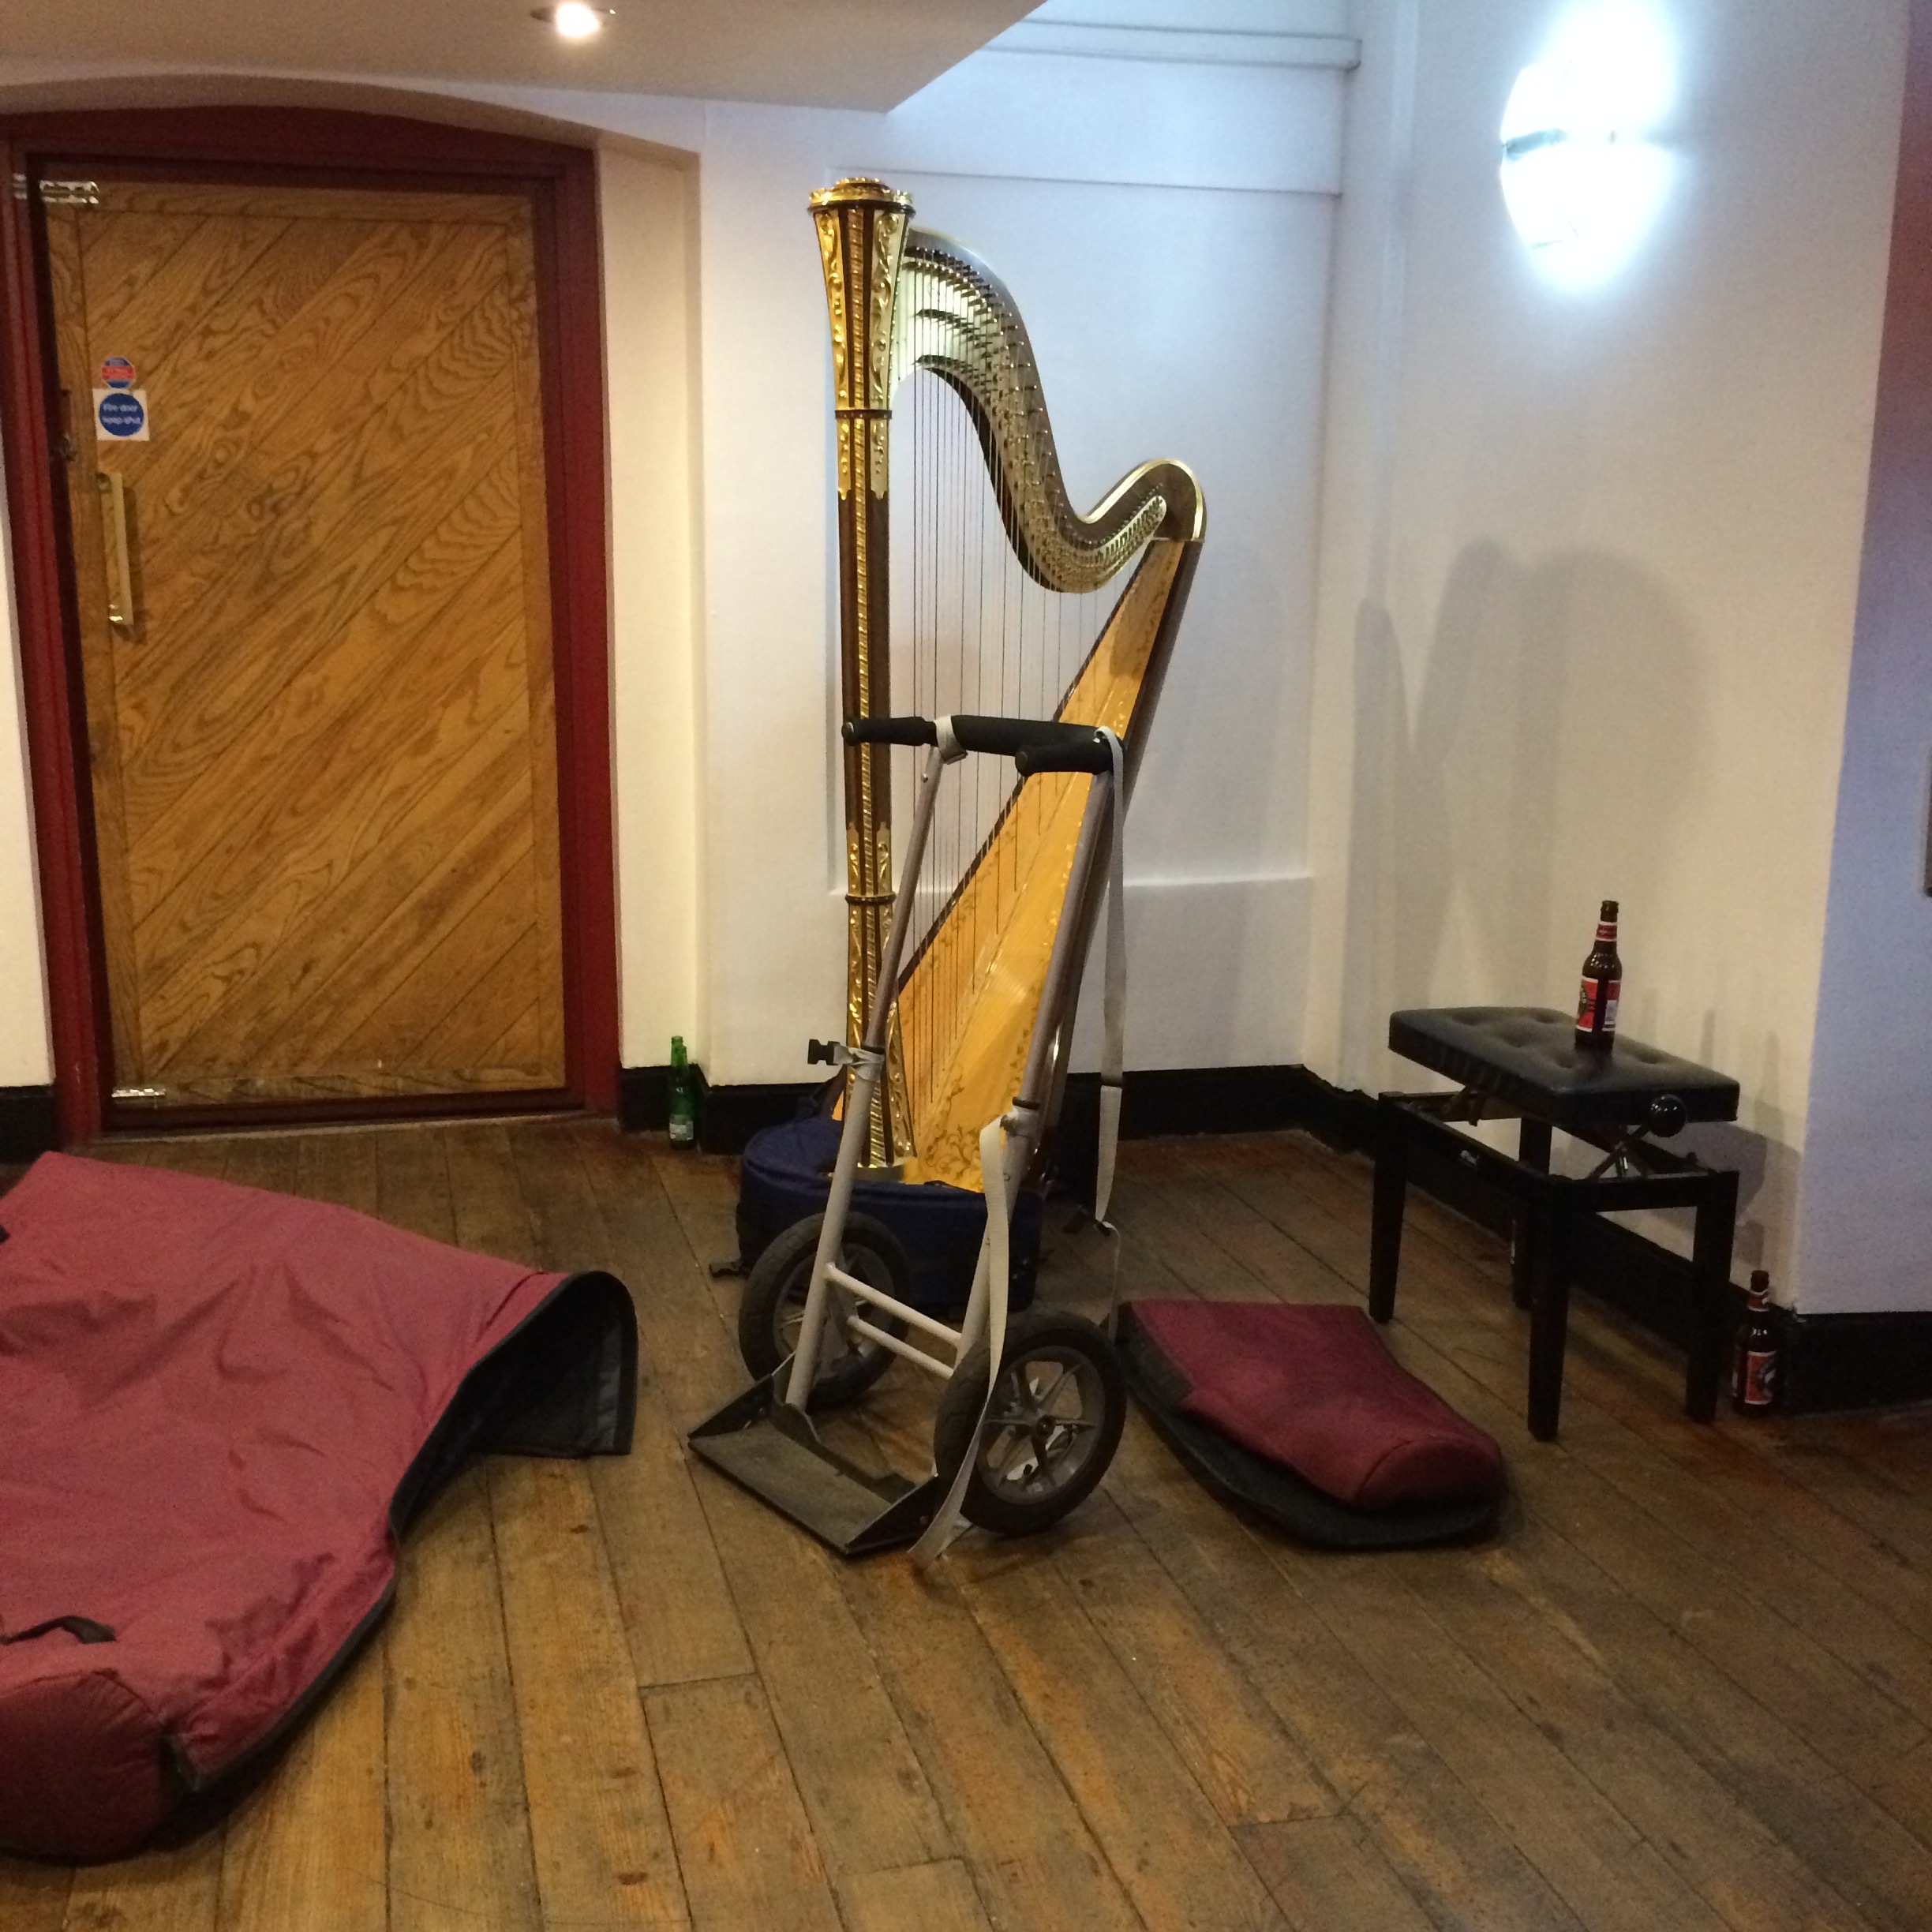 Goosebumps as I found myself and my harp parked in the corner of a studio Amy Winehouse had recorded in 